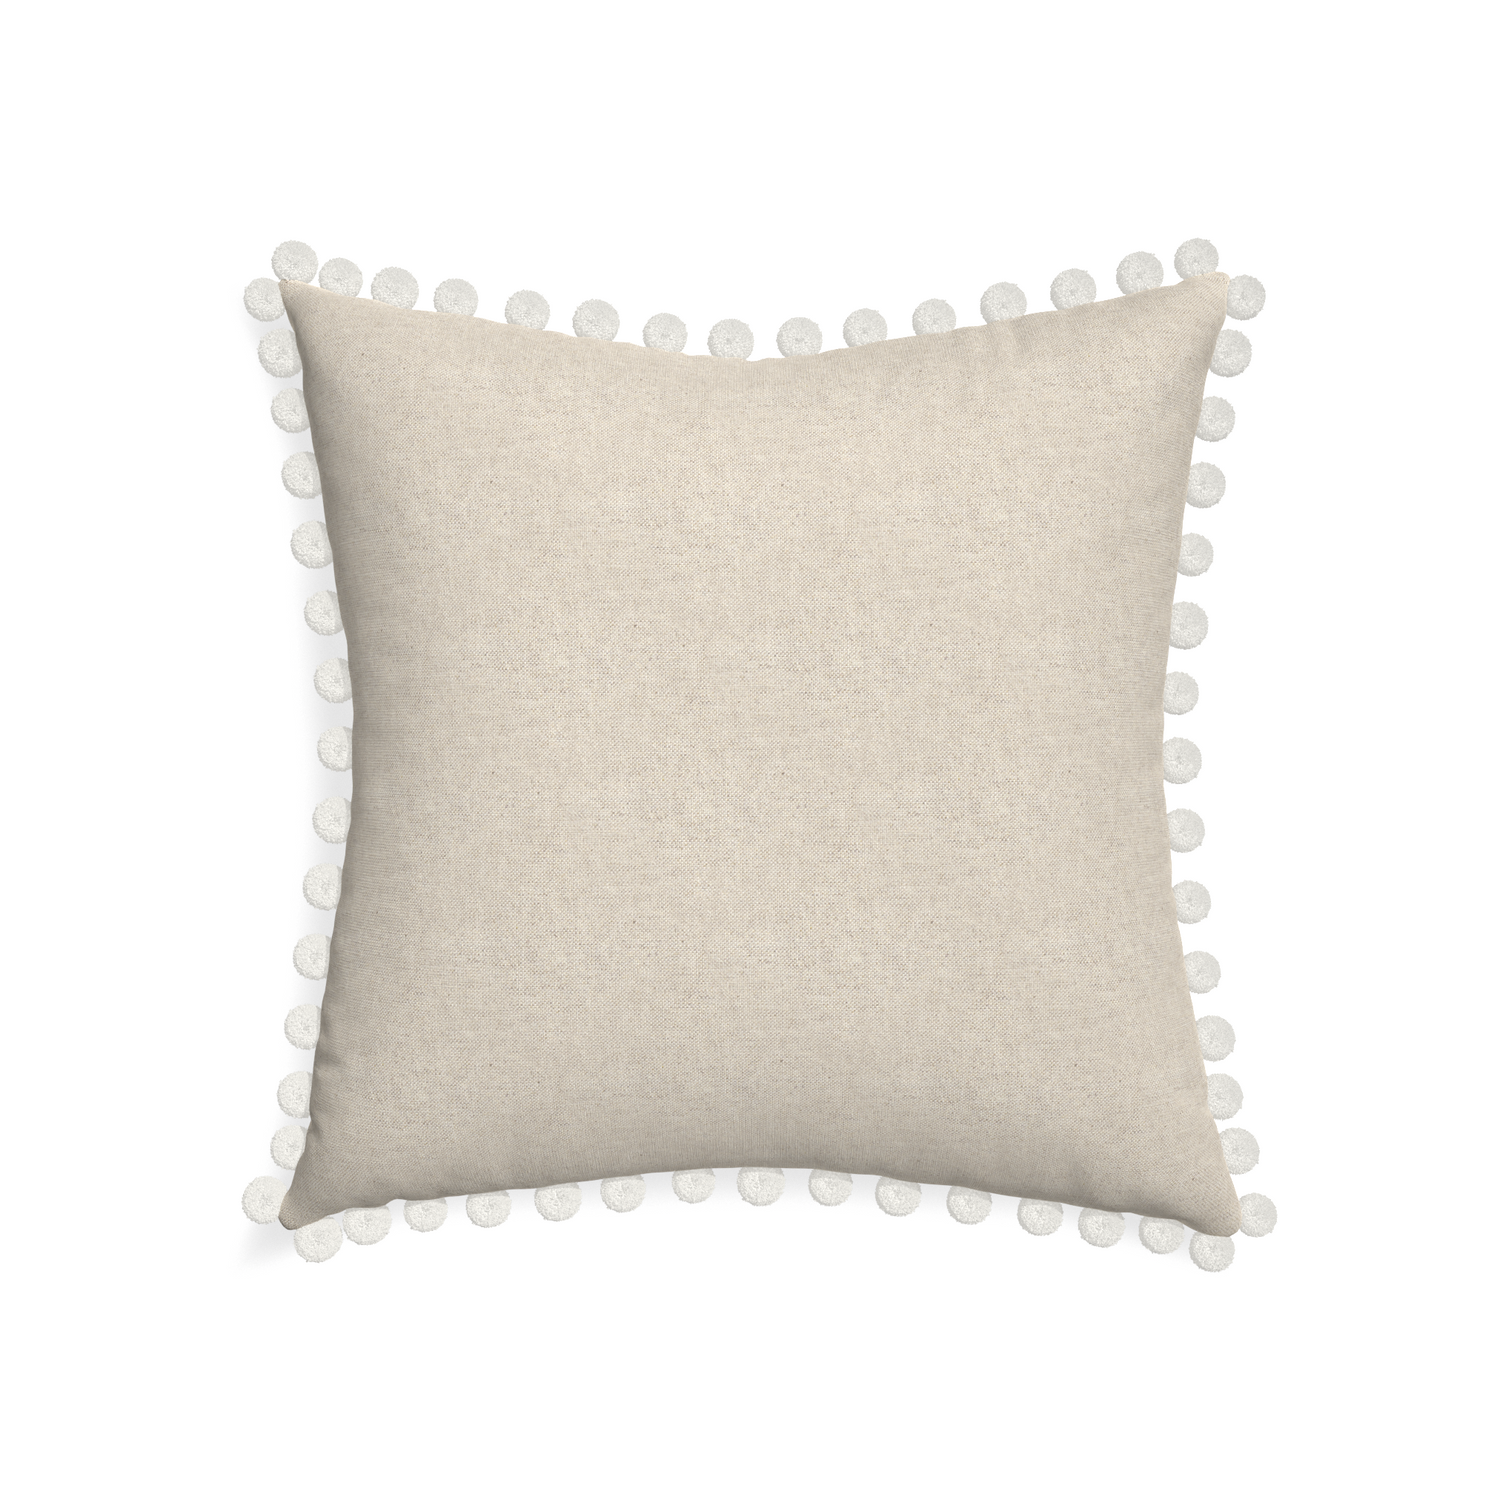 22-square oat custom light brownpillow with snow pom pom on white background